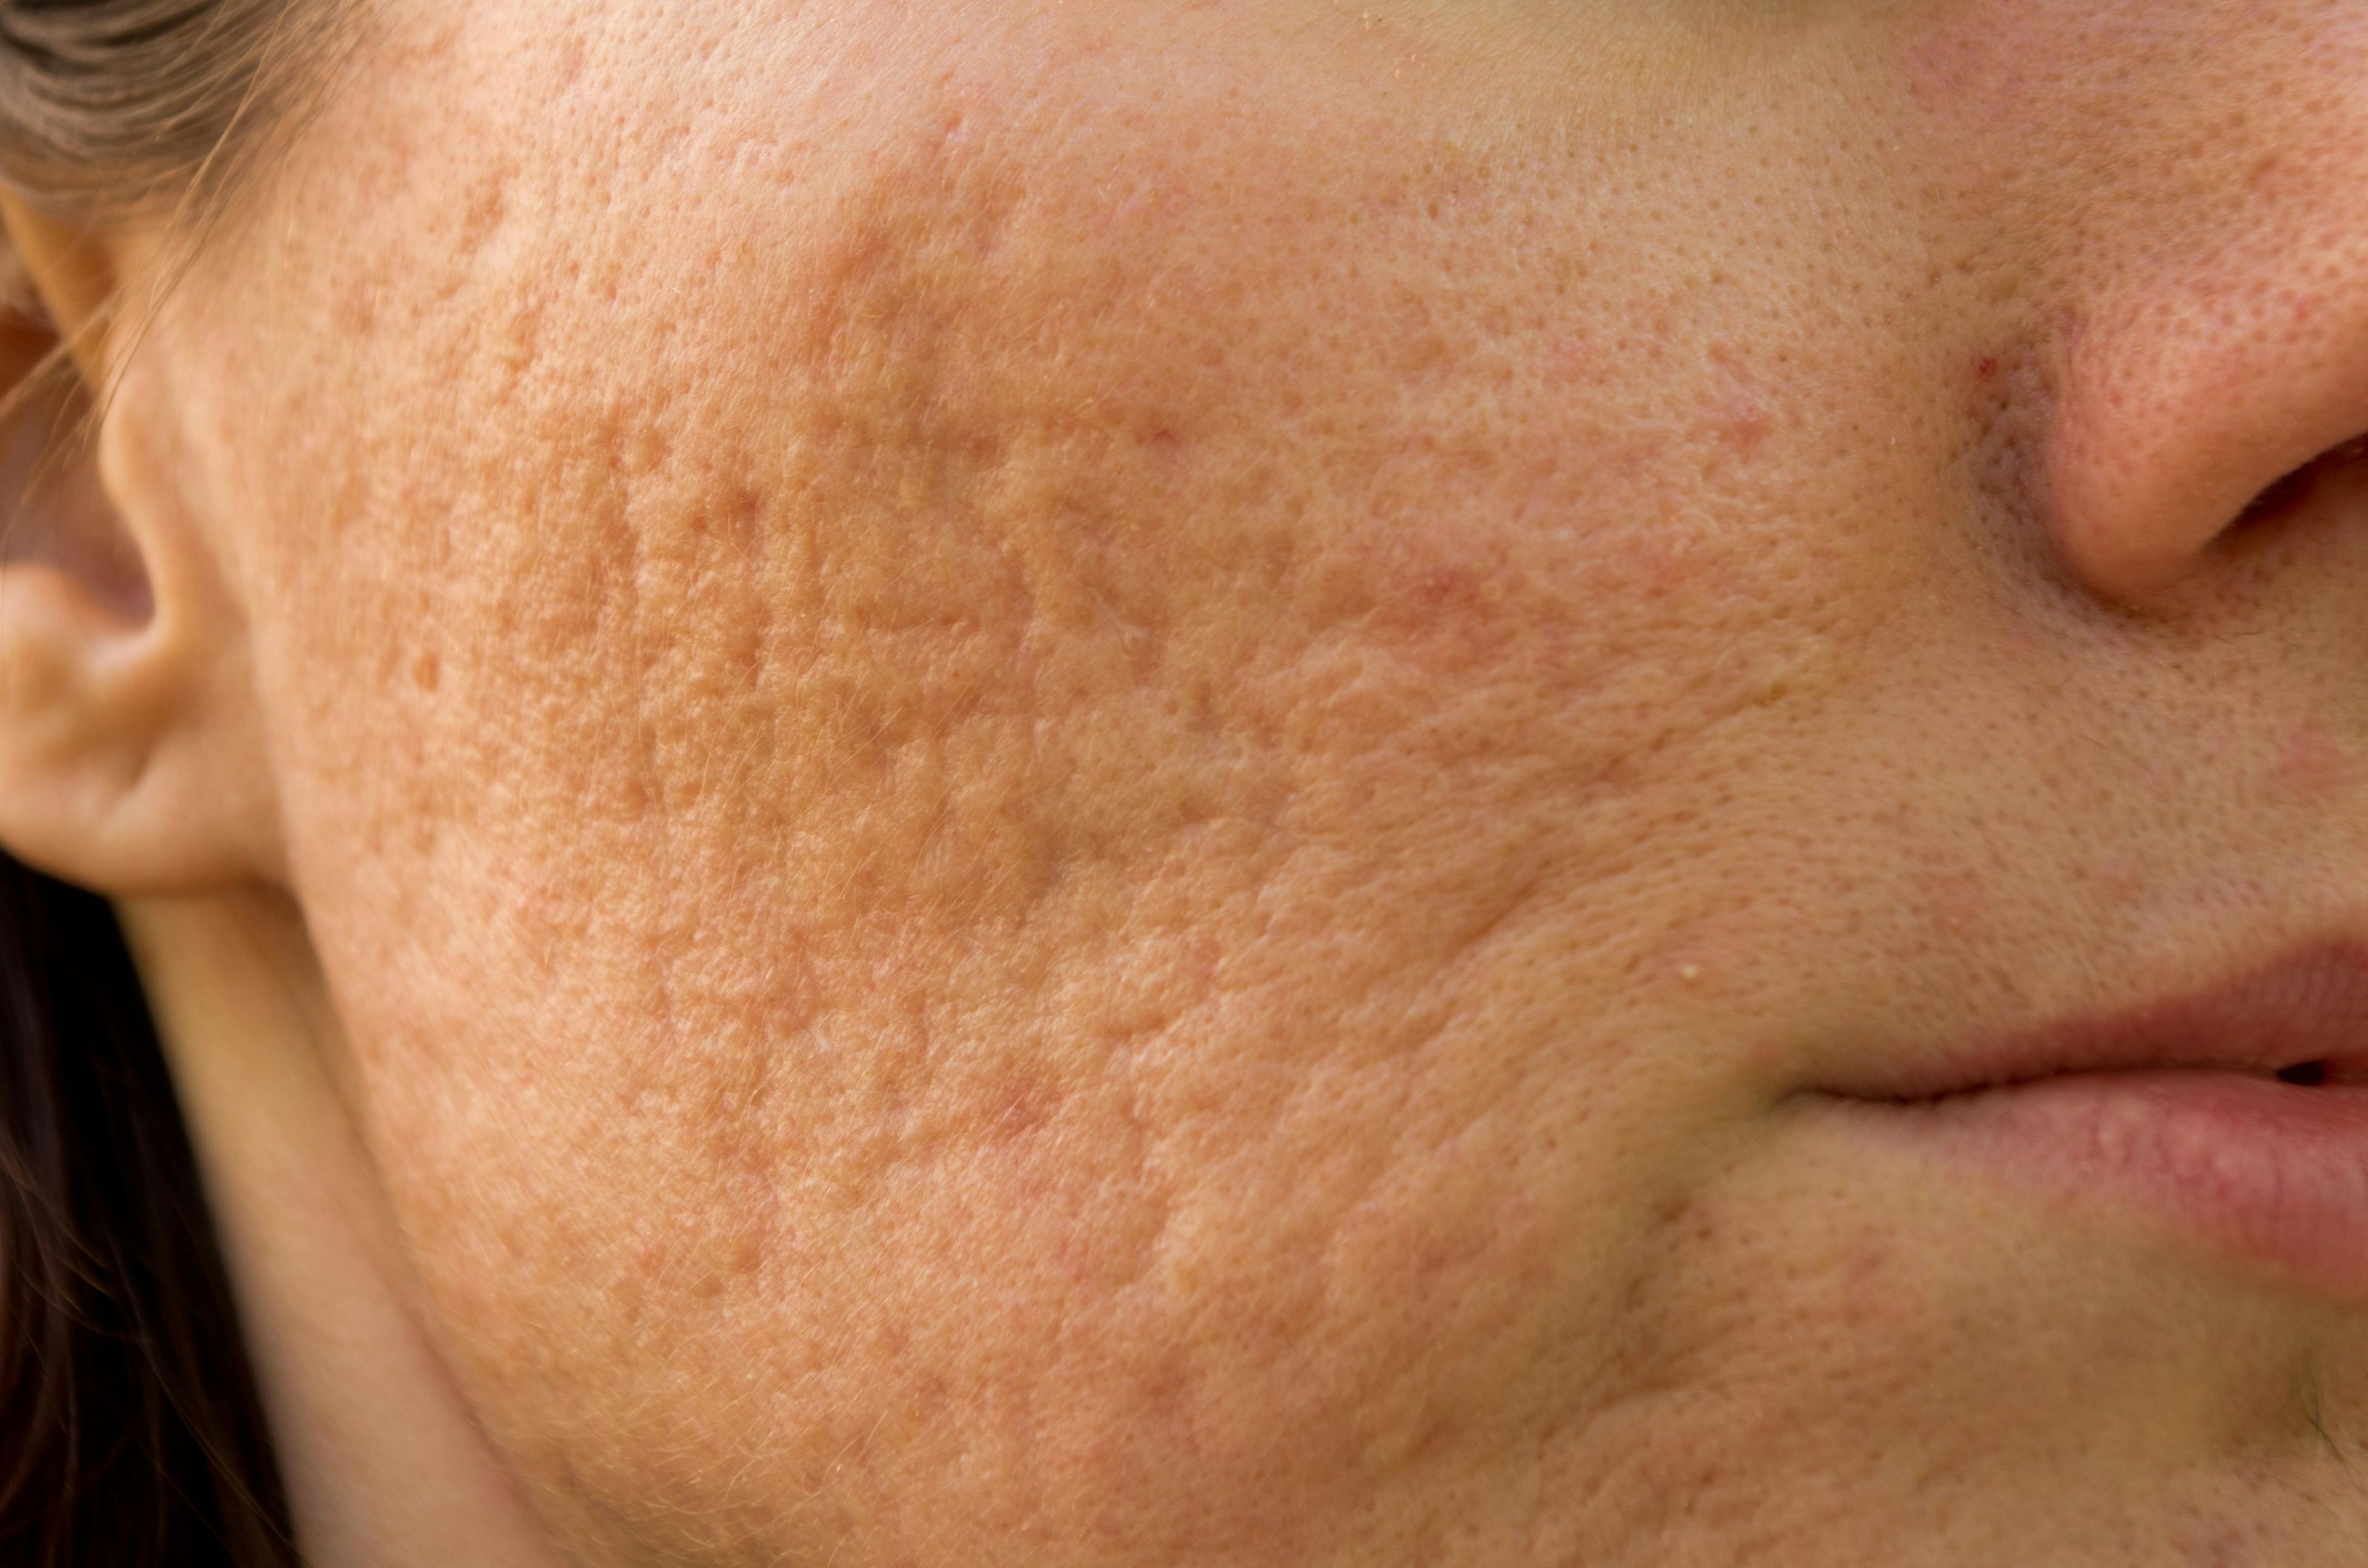 Post-Acne Vulgaris Scarring Leads to Negative Body Image and Self-Esteem